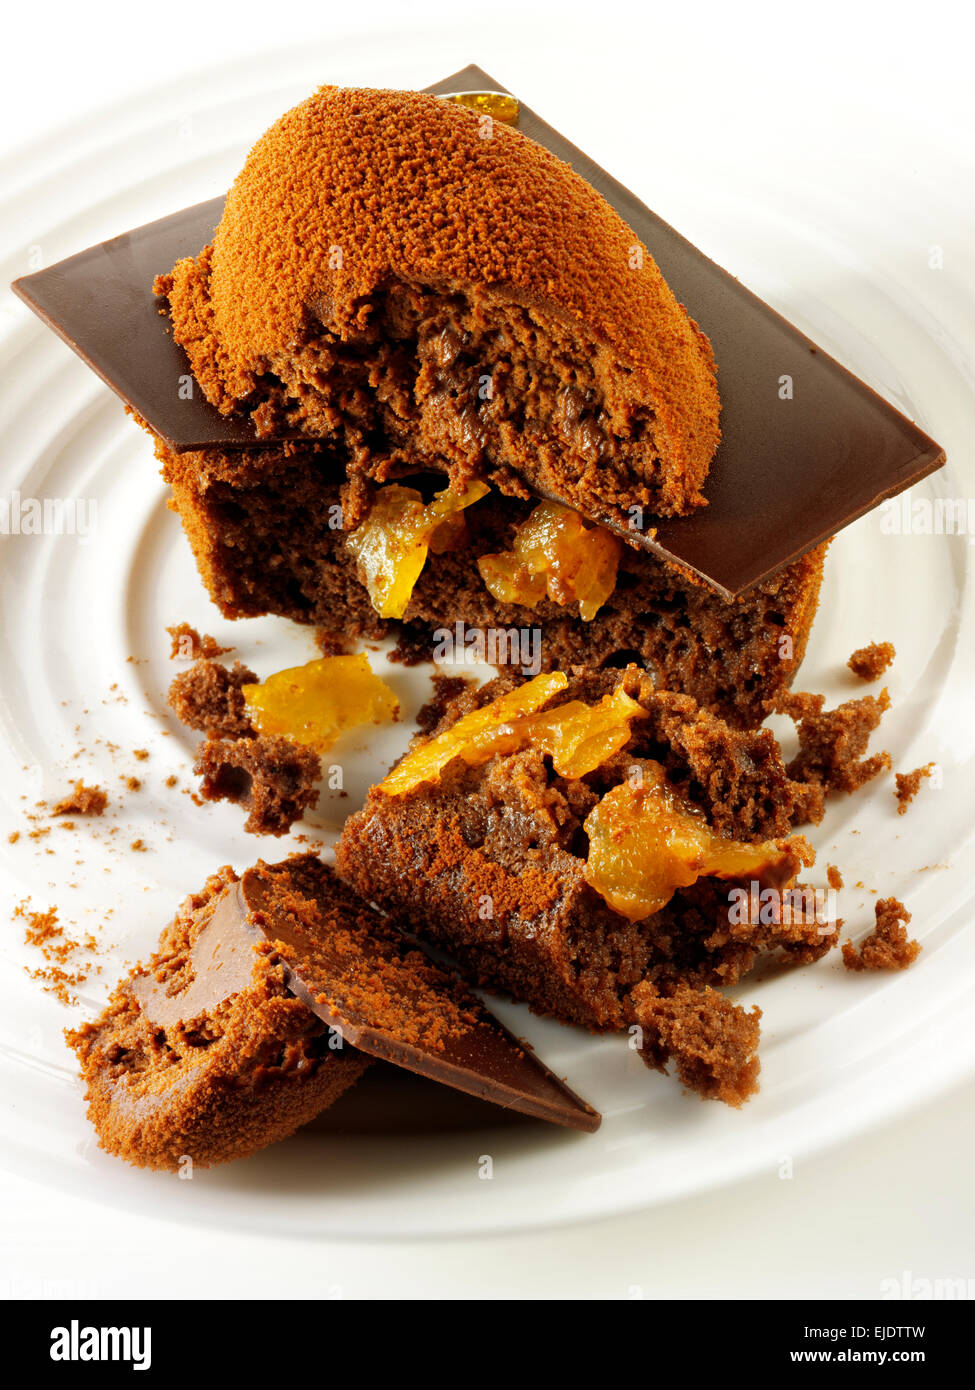 Chocolate cake with a sponge case and chocolate filling, covered with cocoa powder Stock Photo